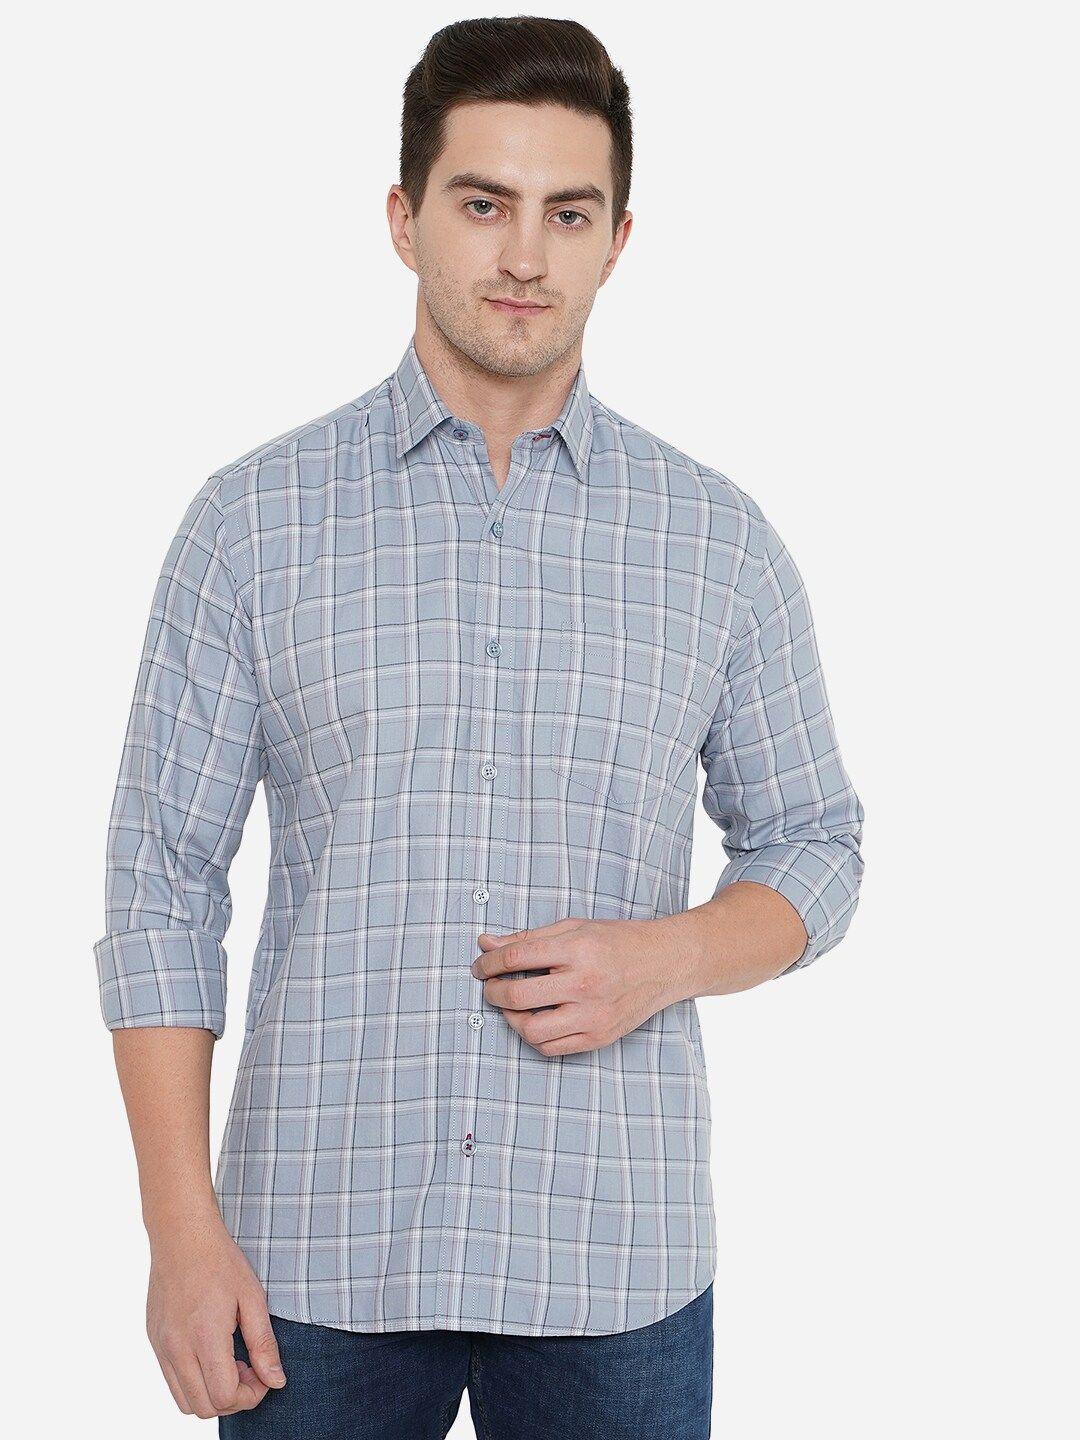 jade-blue-men-grey-classic-slim-fit-checked-cotton-casual-shirt